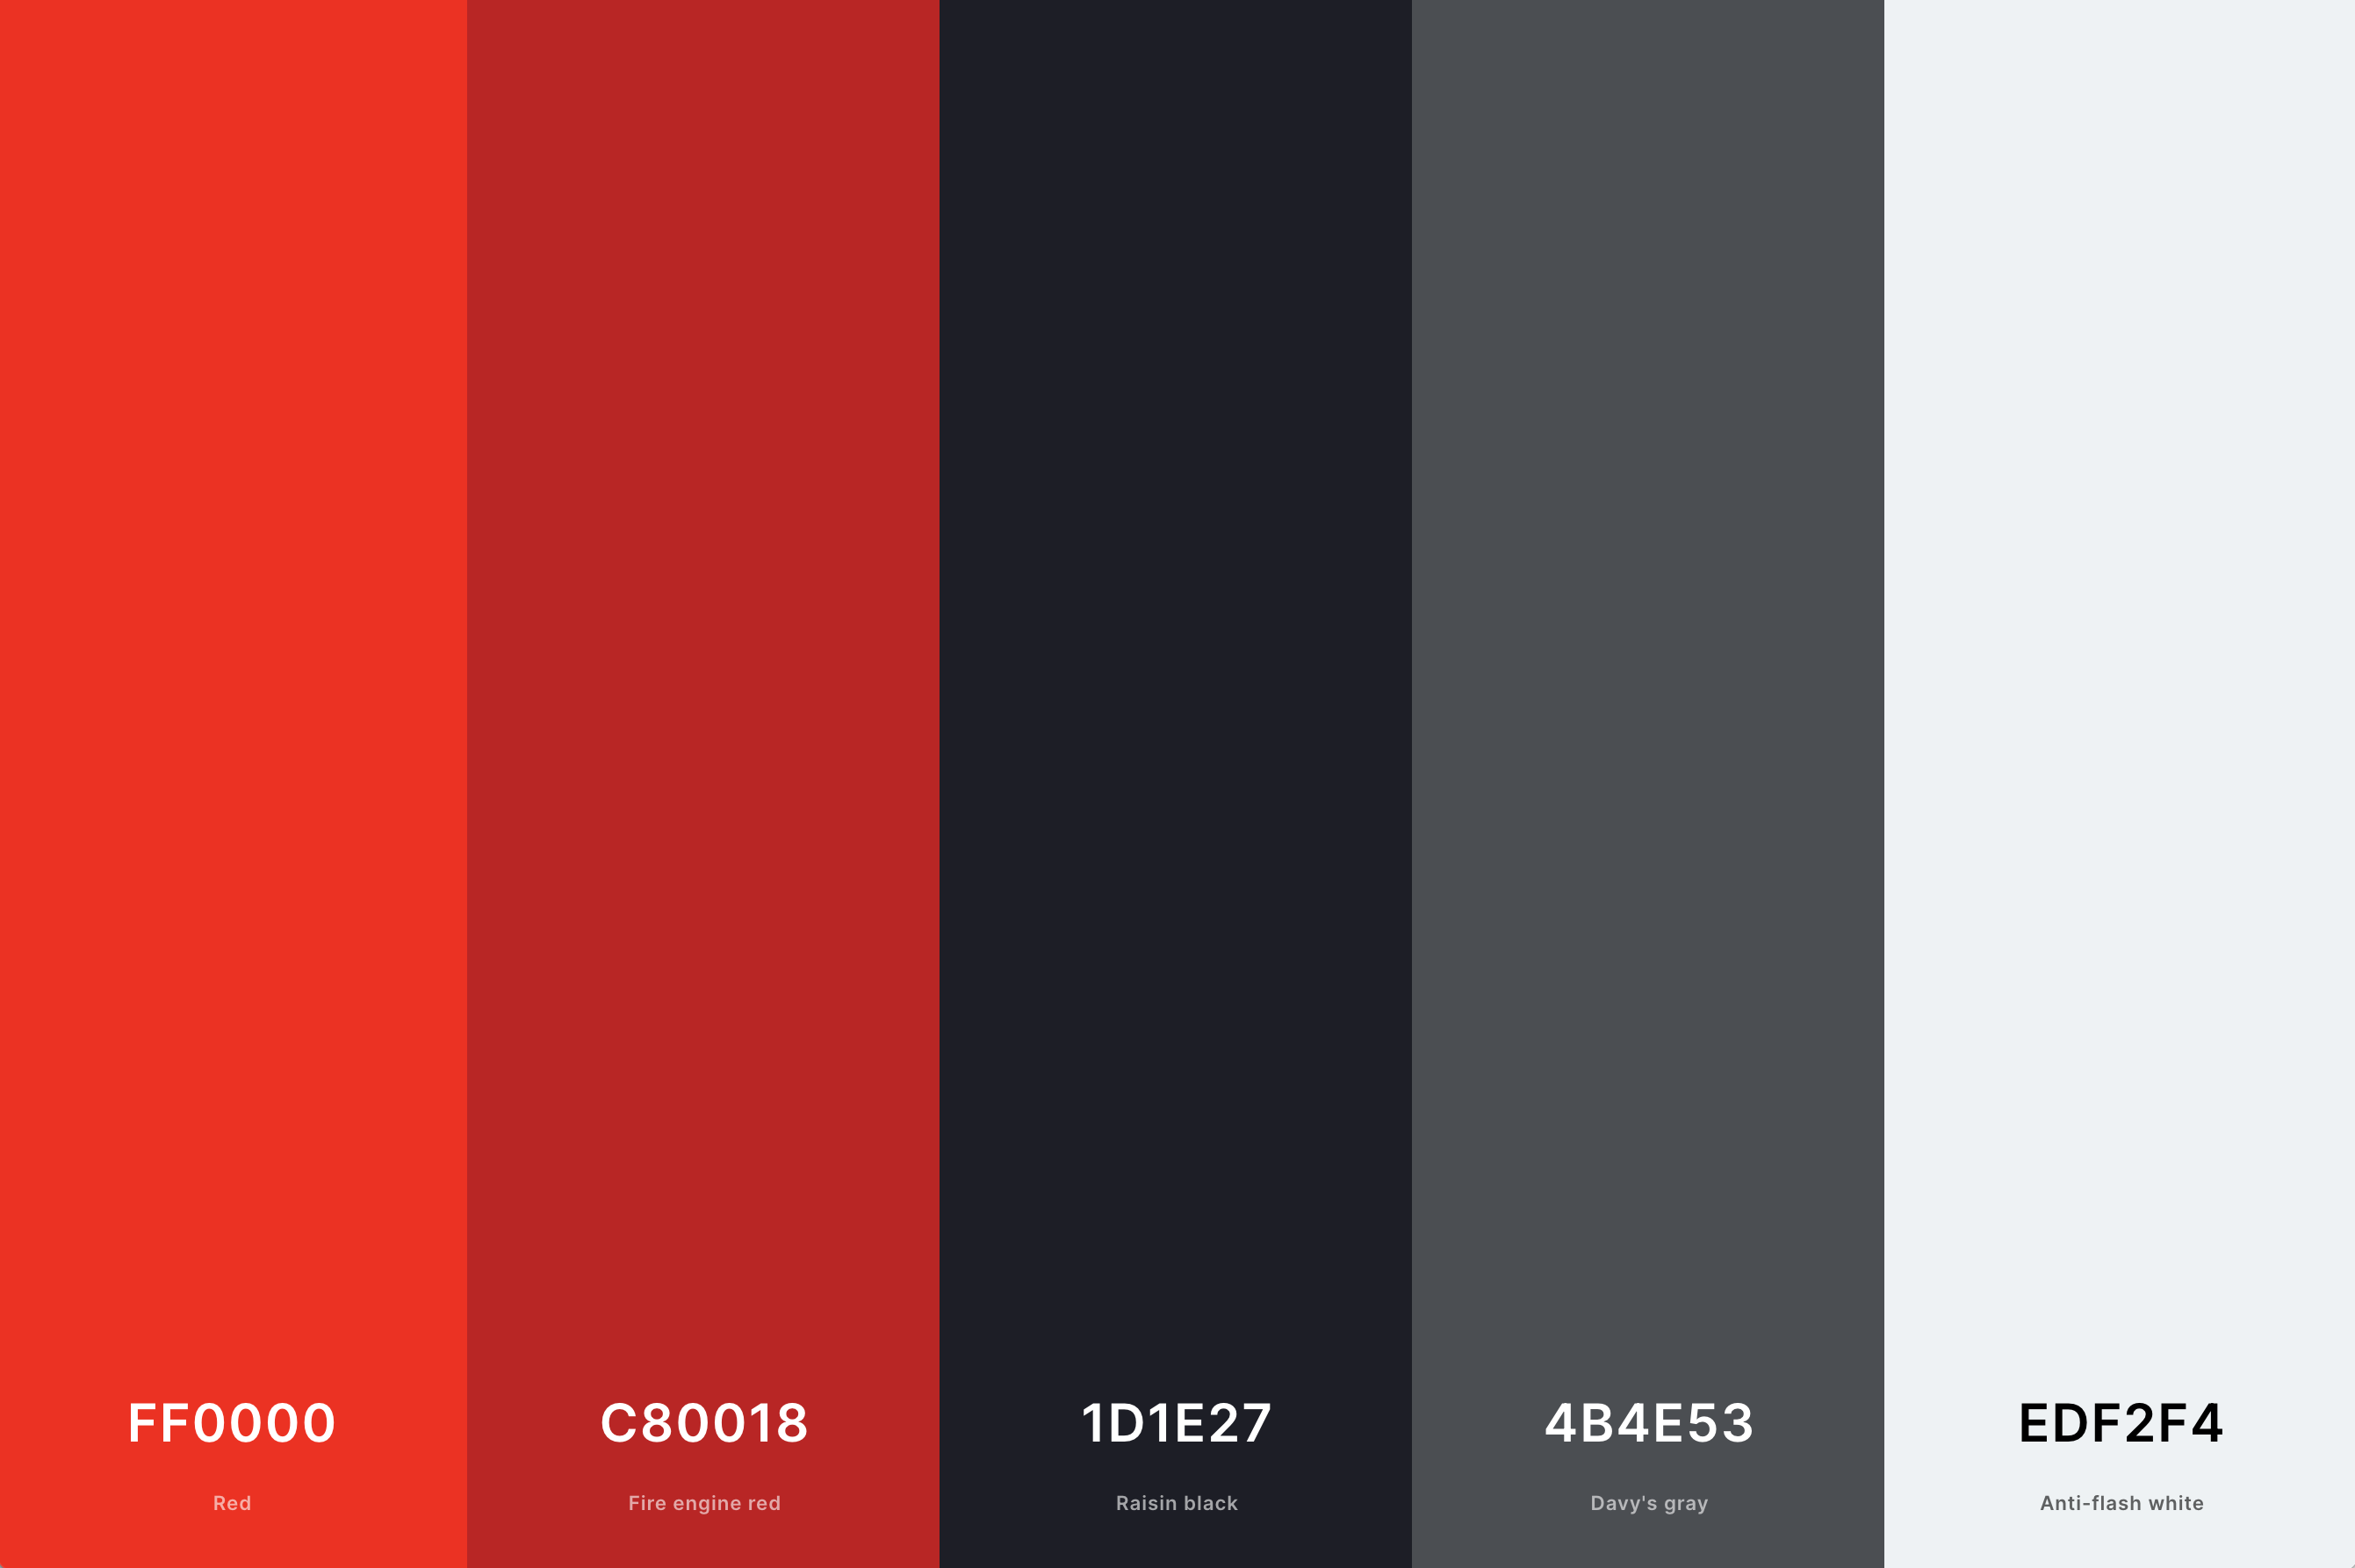 1. Red And Black Color Palette Color Palette with Red (Hex #FF0000) + Fire Engine Red (Hex #C80018) + Raisin Black (Hex #1D1E27) + Davy'S Gray (Hex #4B4E53) + Anti-Flash White (Hex #EDF2F4) Color Palette with Hex Codes